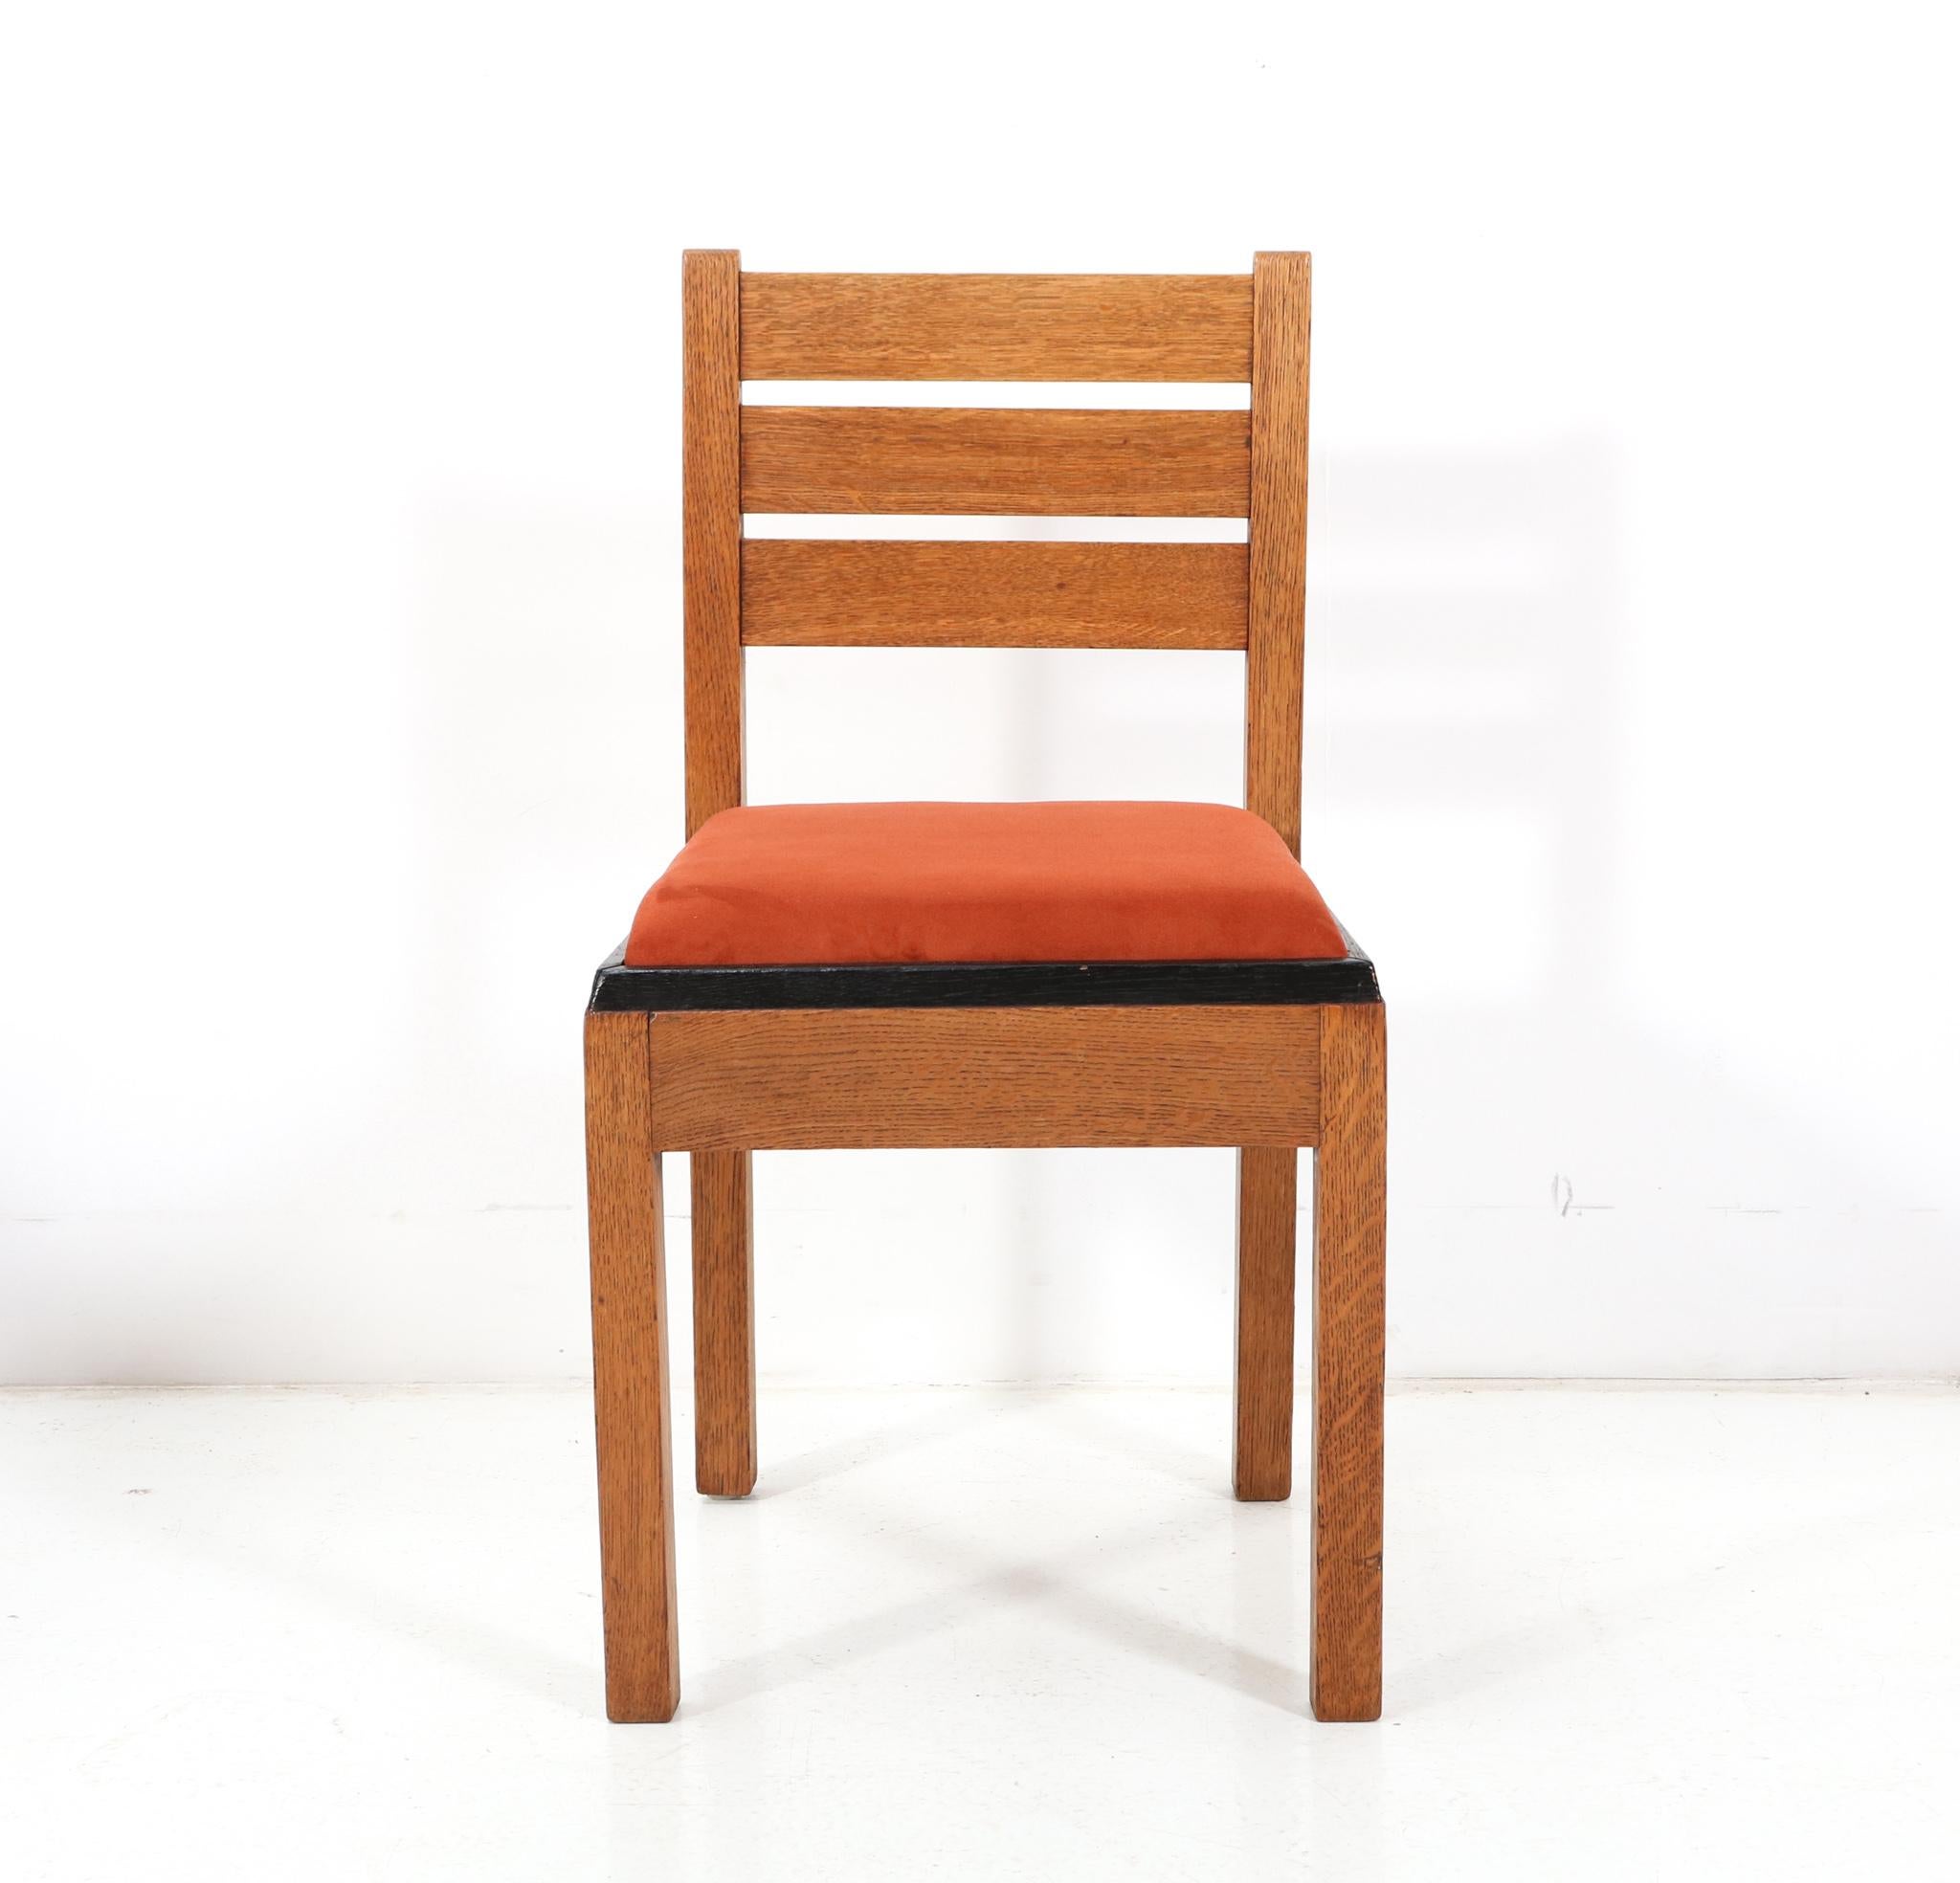 Magnificent and ultra rare Art Deco Modernist side chair.
Design by Jan Brunott.
Striking Dutch design from the 1920s.
Solid oak frame with original black lacquered lining.
The seat has been re-upholstered with a cognac velvet fabric.
This